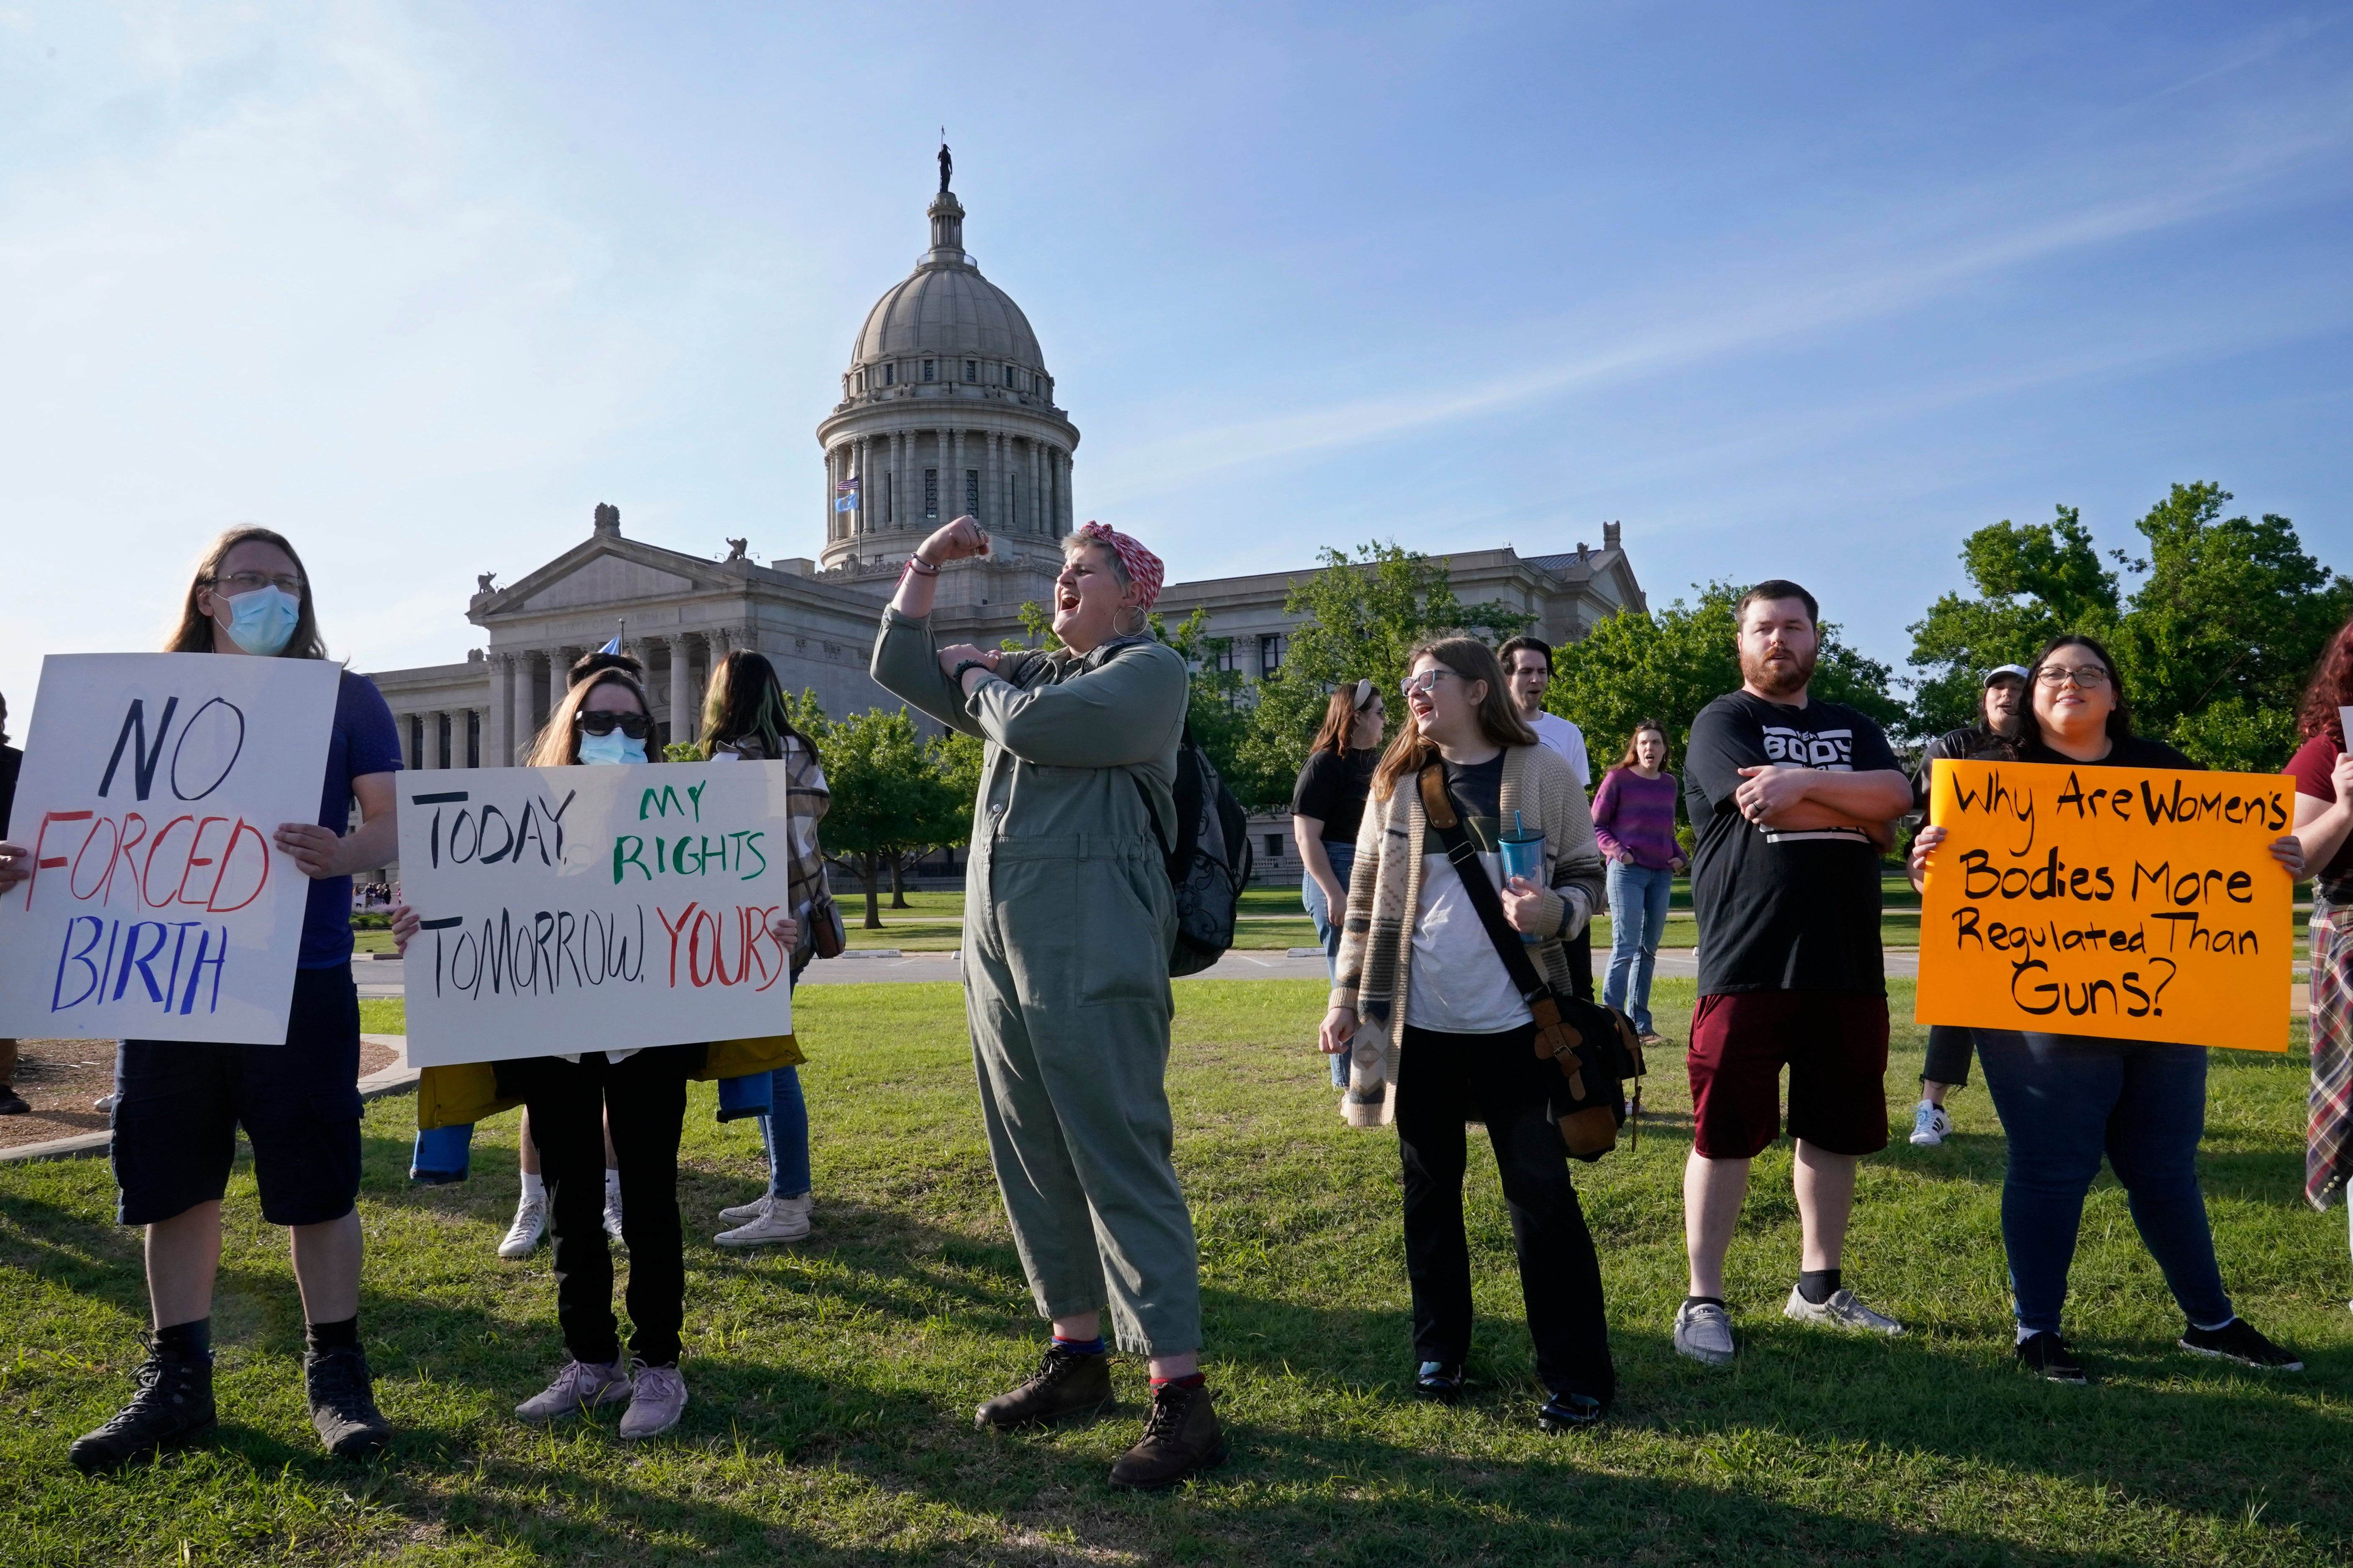 Abortion rights advocates protest outside the state capitol in Oklahoma City after Governor Kevin Stitt signed a law banning abortions at six weeks of pregnancy on 3 May.